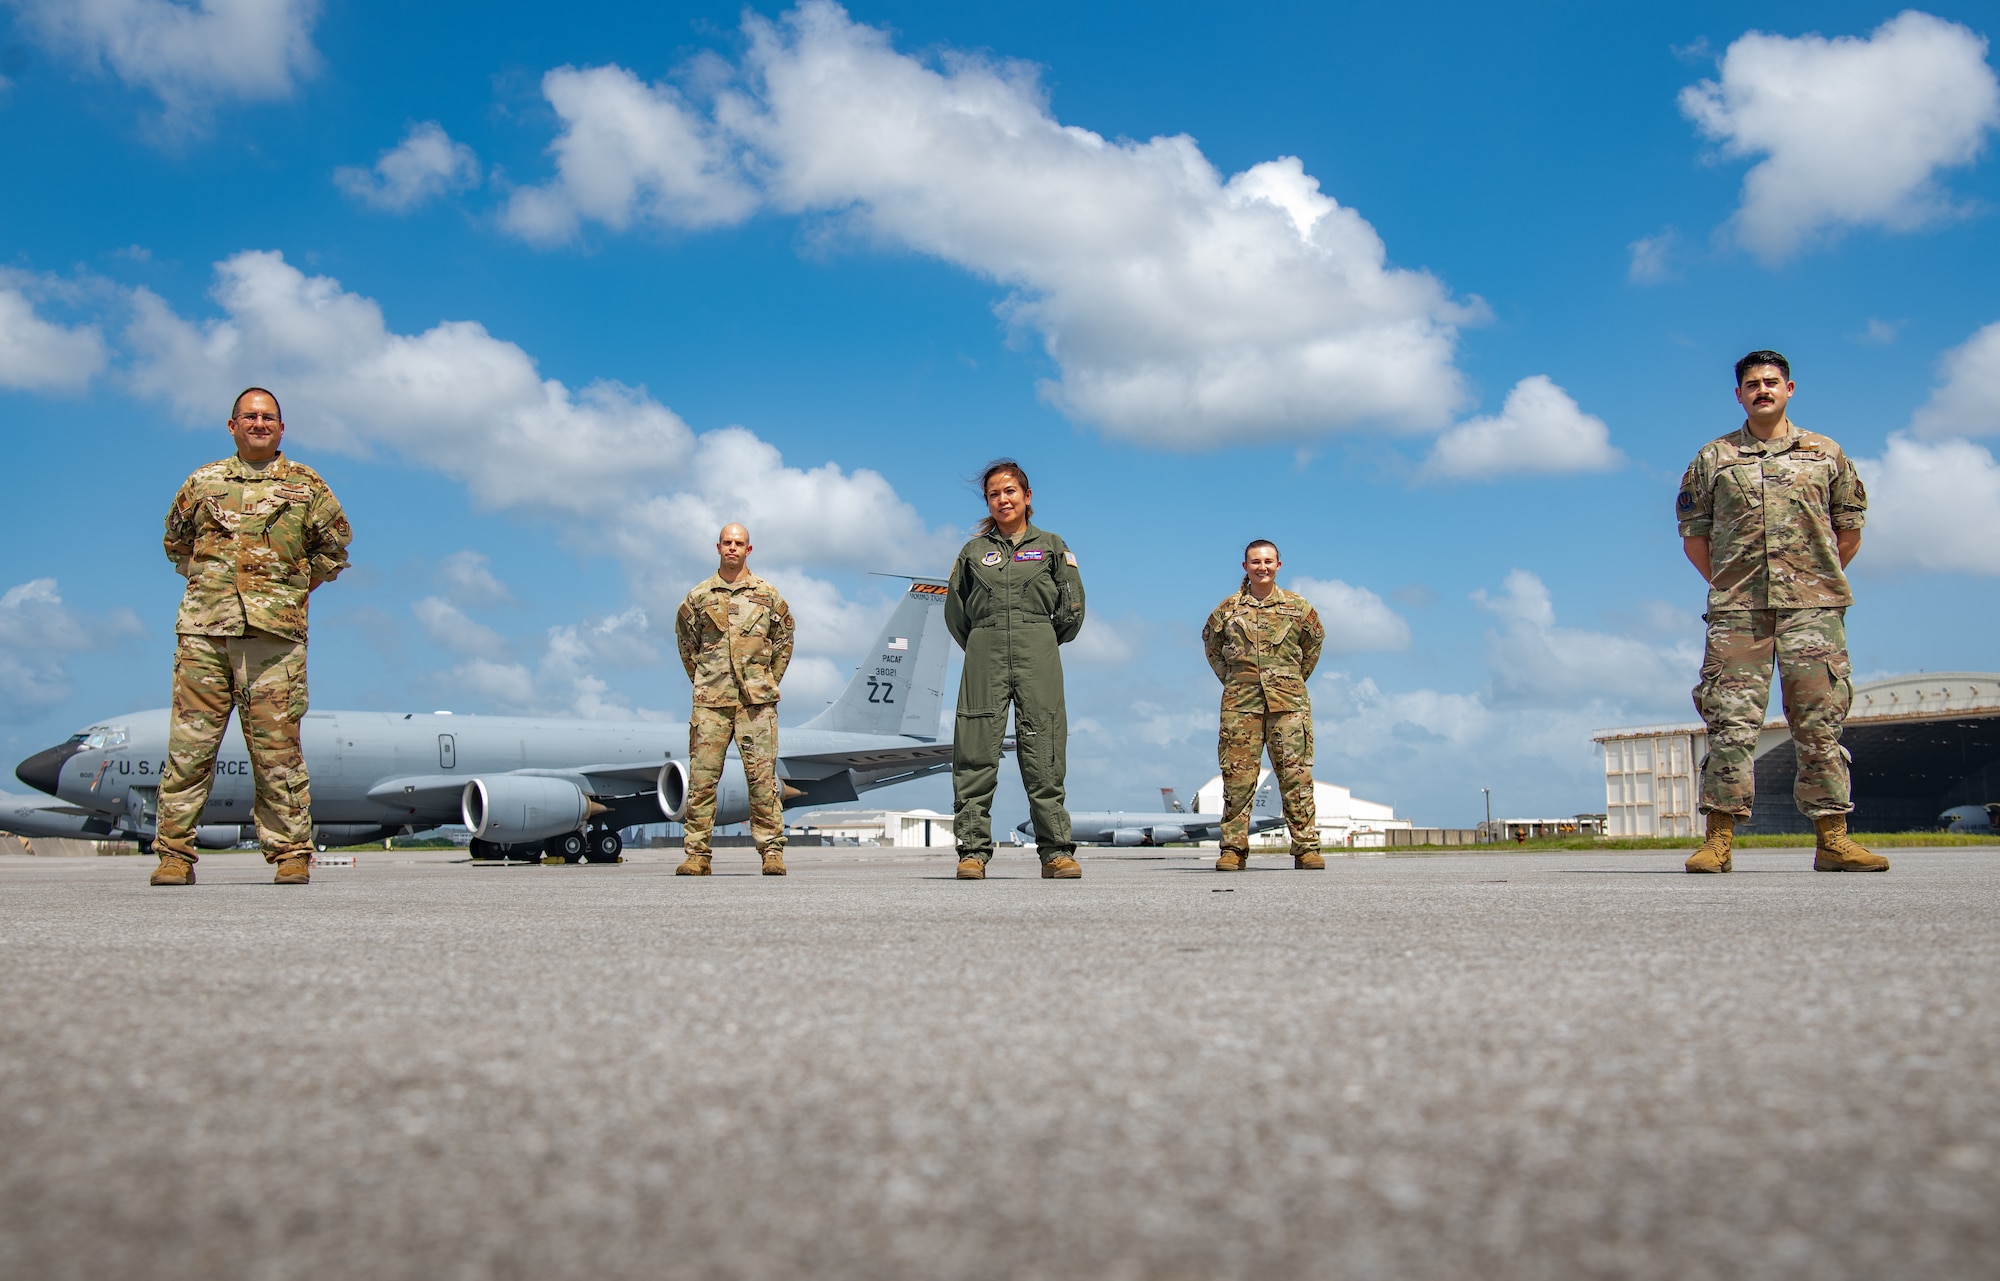 Five U.S. Air Force service members pose for a photo.